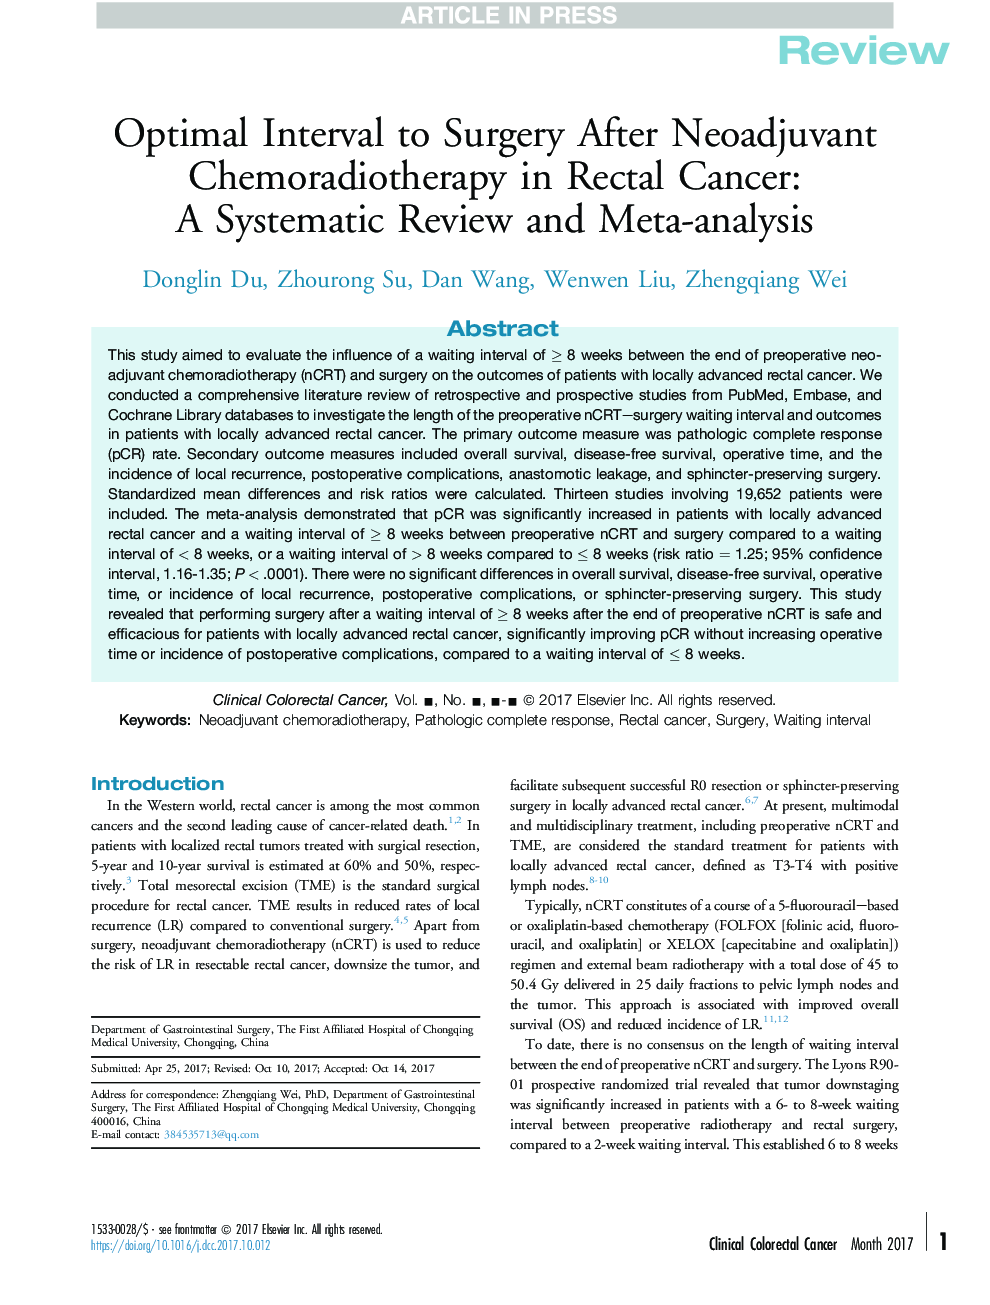 Optimal Interval to Surgery After Neoadjuvant Chemoradiotherapy in Rectal Cancer: AÂ Systematic Review and Meta-analysis